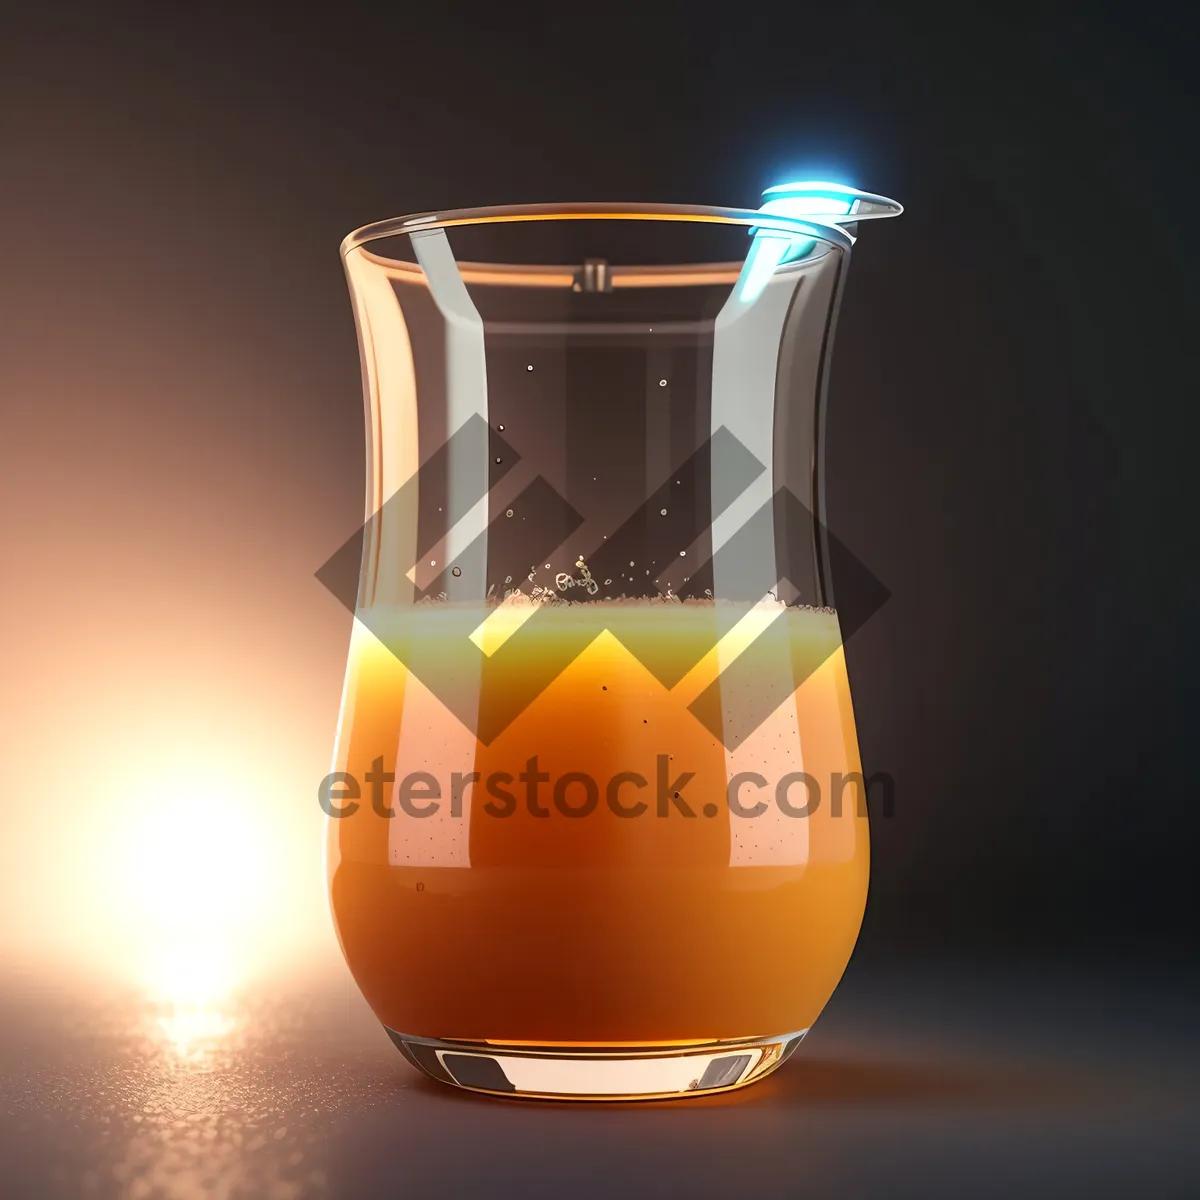 Picture of Refreshing yellow drink in transparent pitcher.